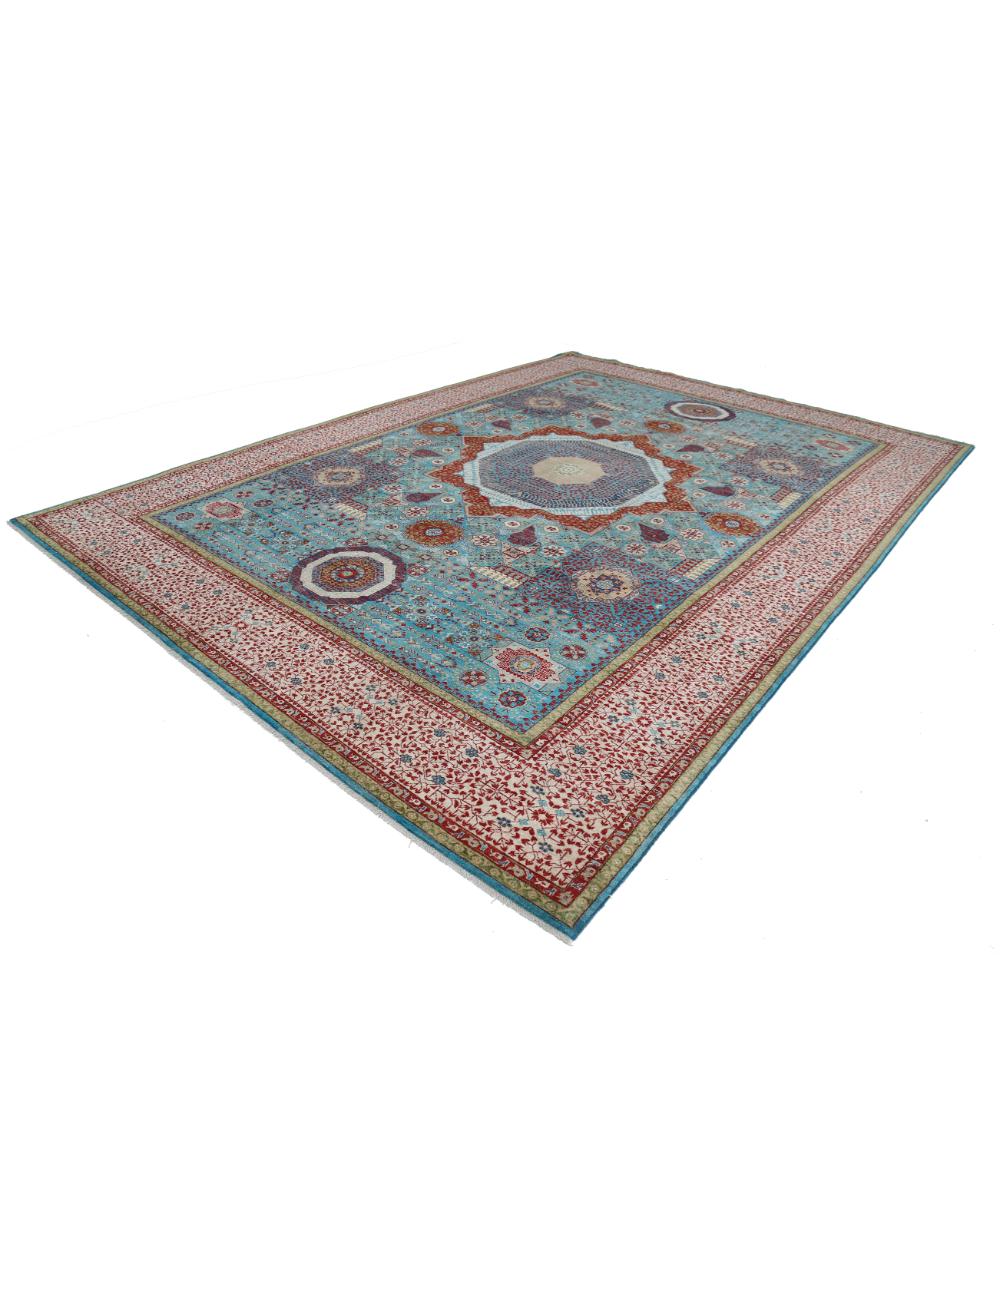 Mamluk 9' 9" X 13' 10" Hand-Knotted Wool Rug 9' 9" X 13' 10" (297 X 422) / Teal / Ivory